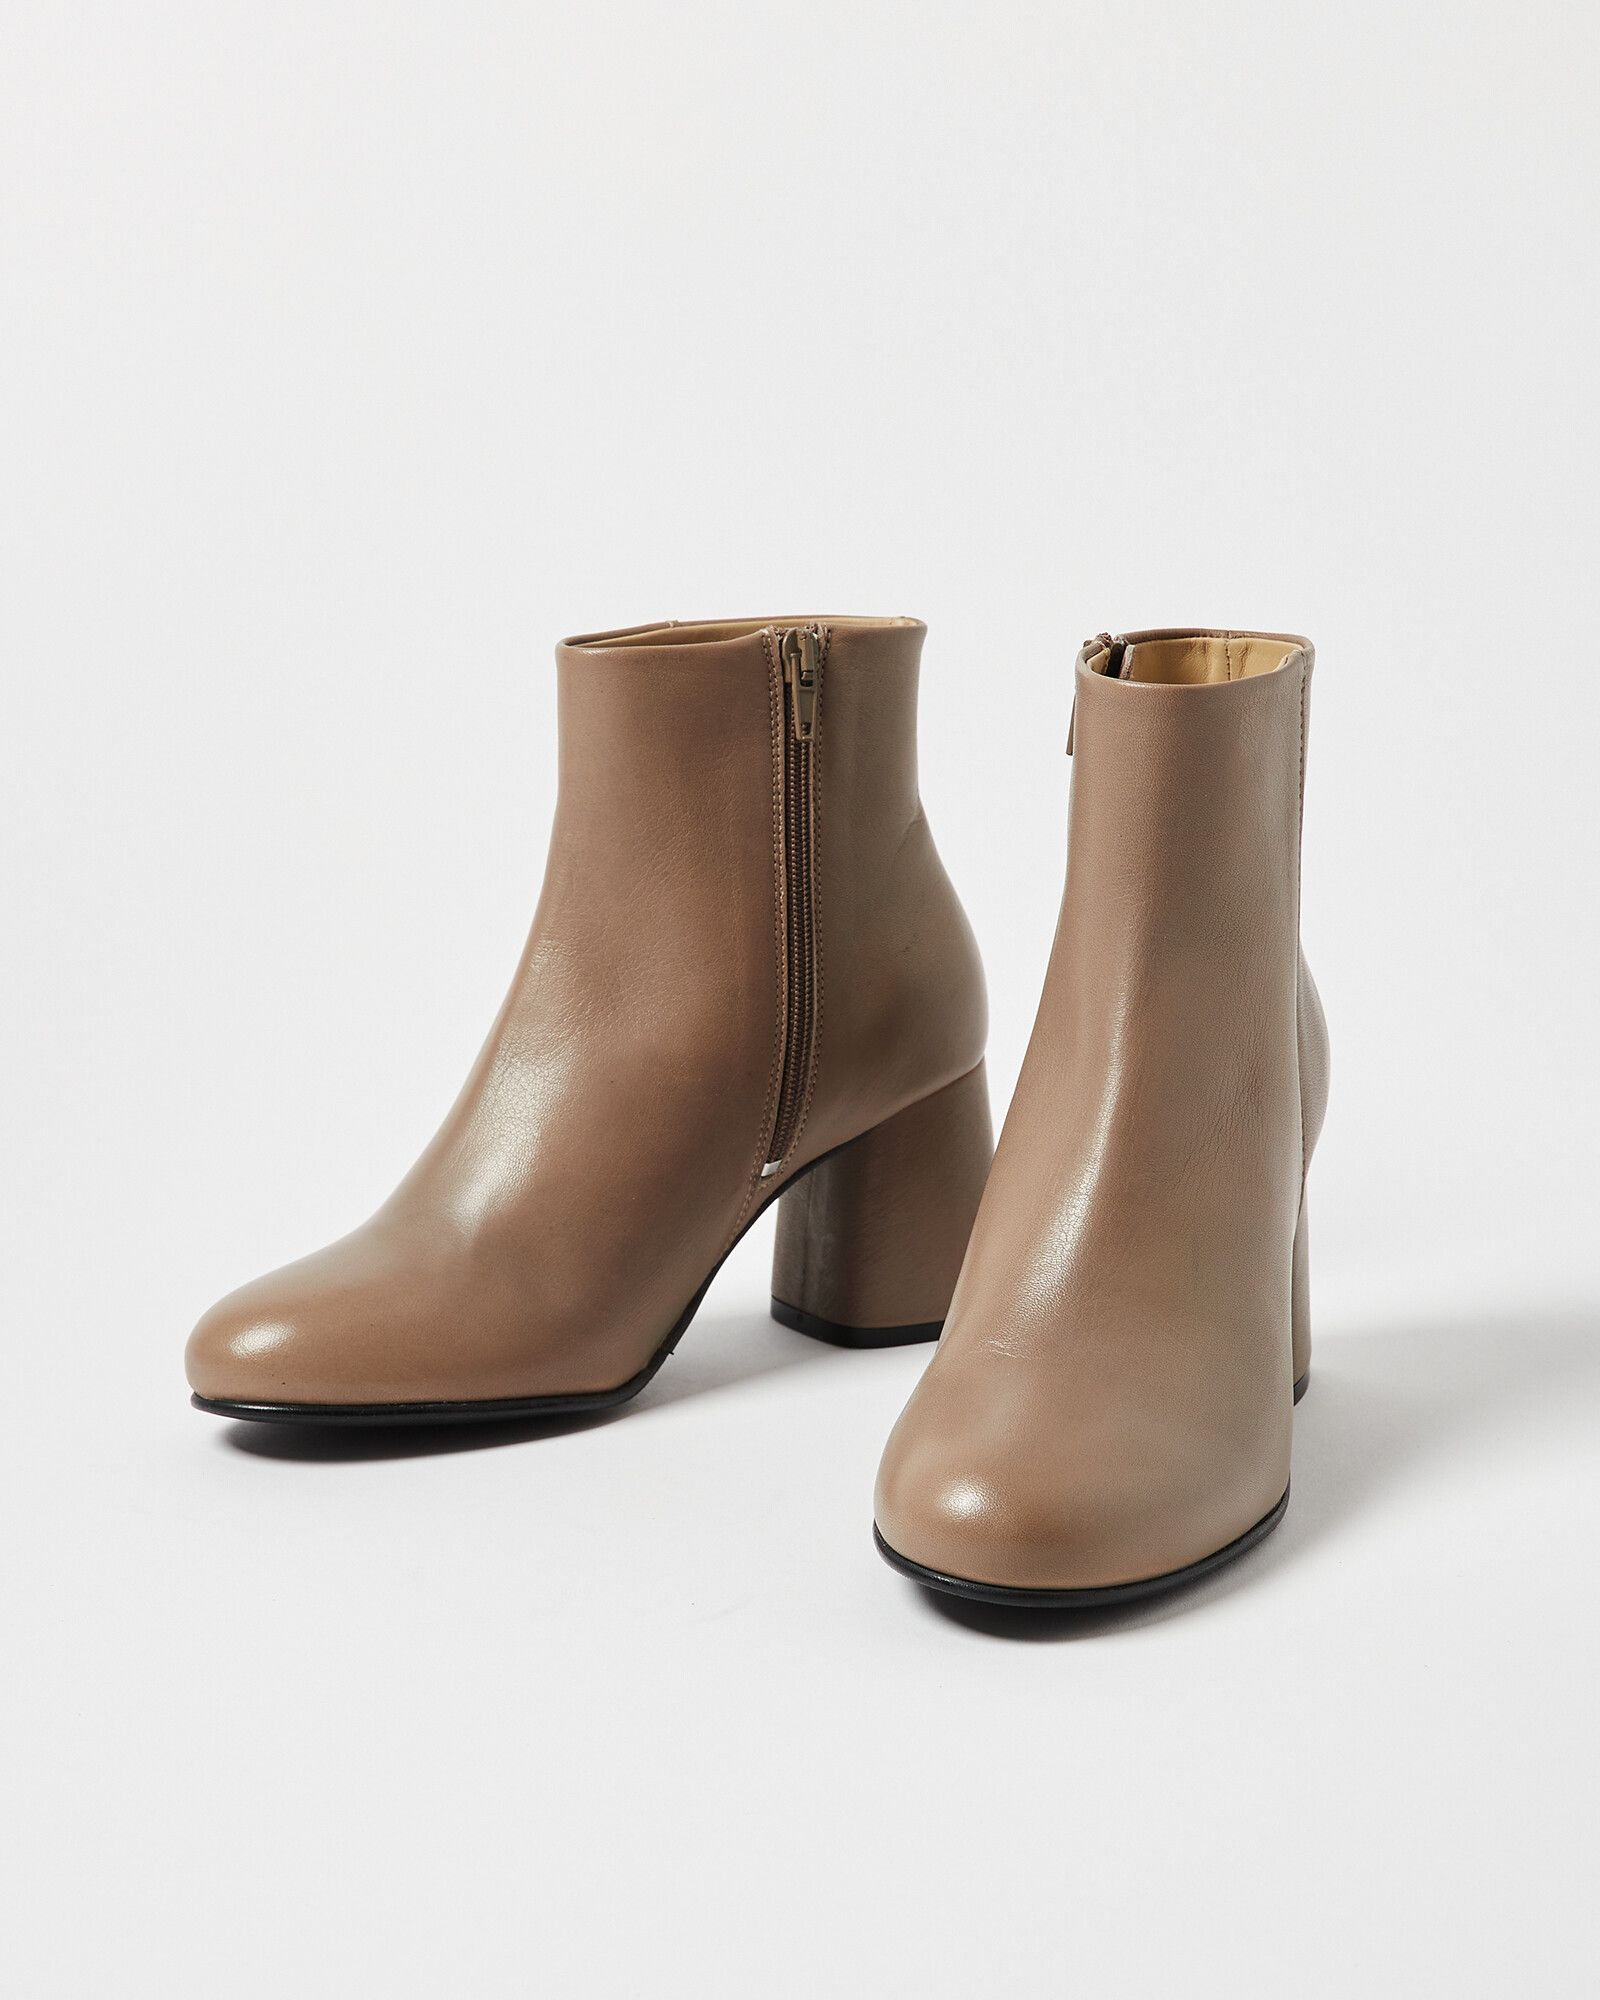 Selected Femme Alva Cream Leather Heeled Boots